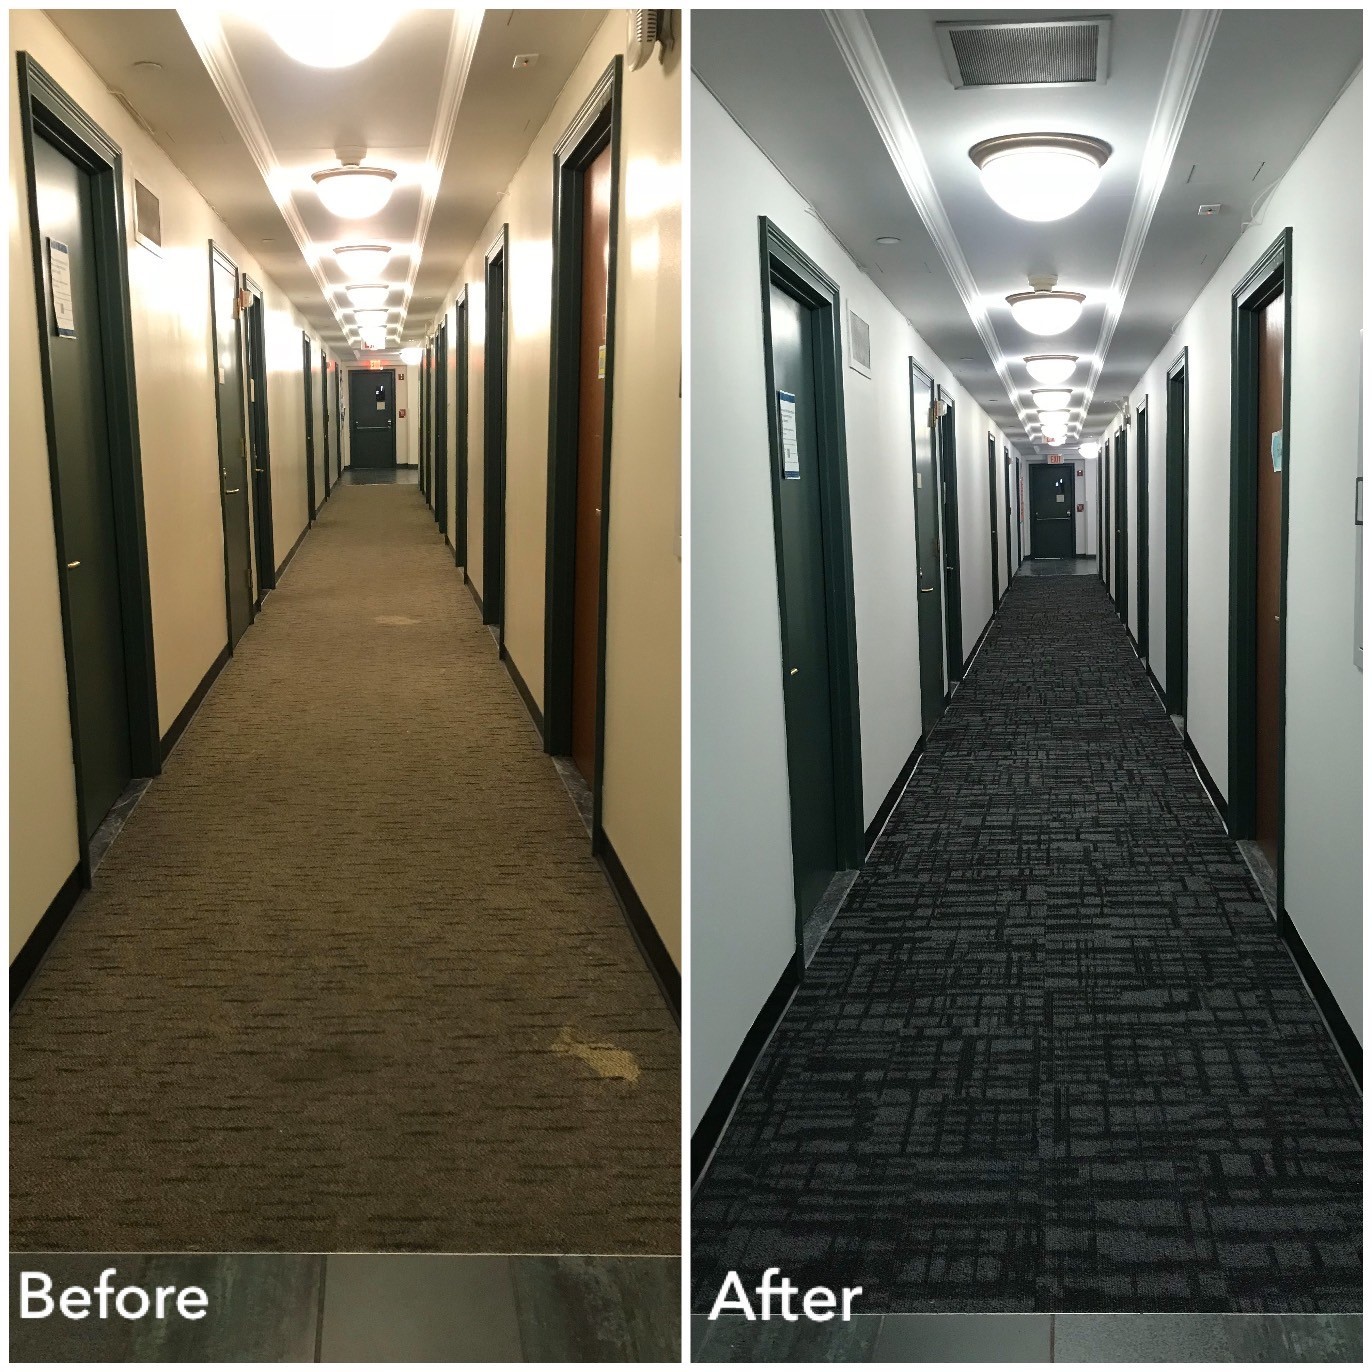 Furnald benefited from improvements including new carpeting and paint on the sixth through tenth floors.